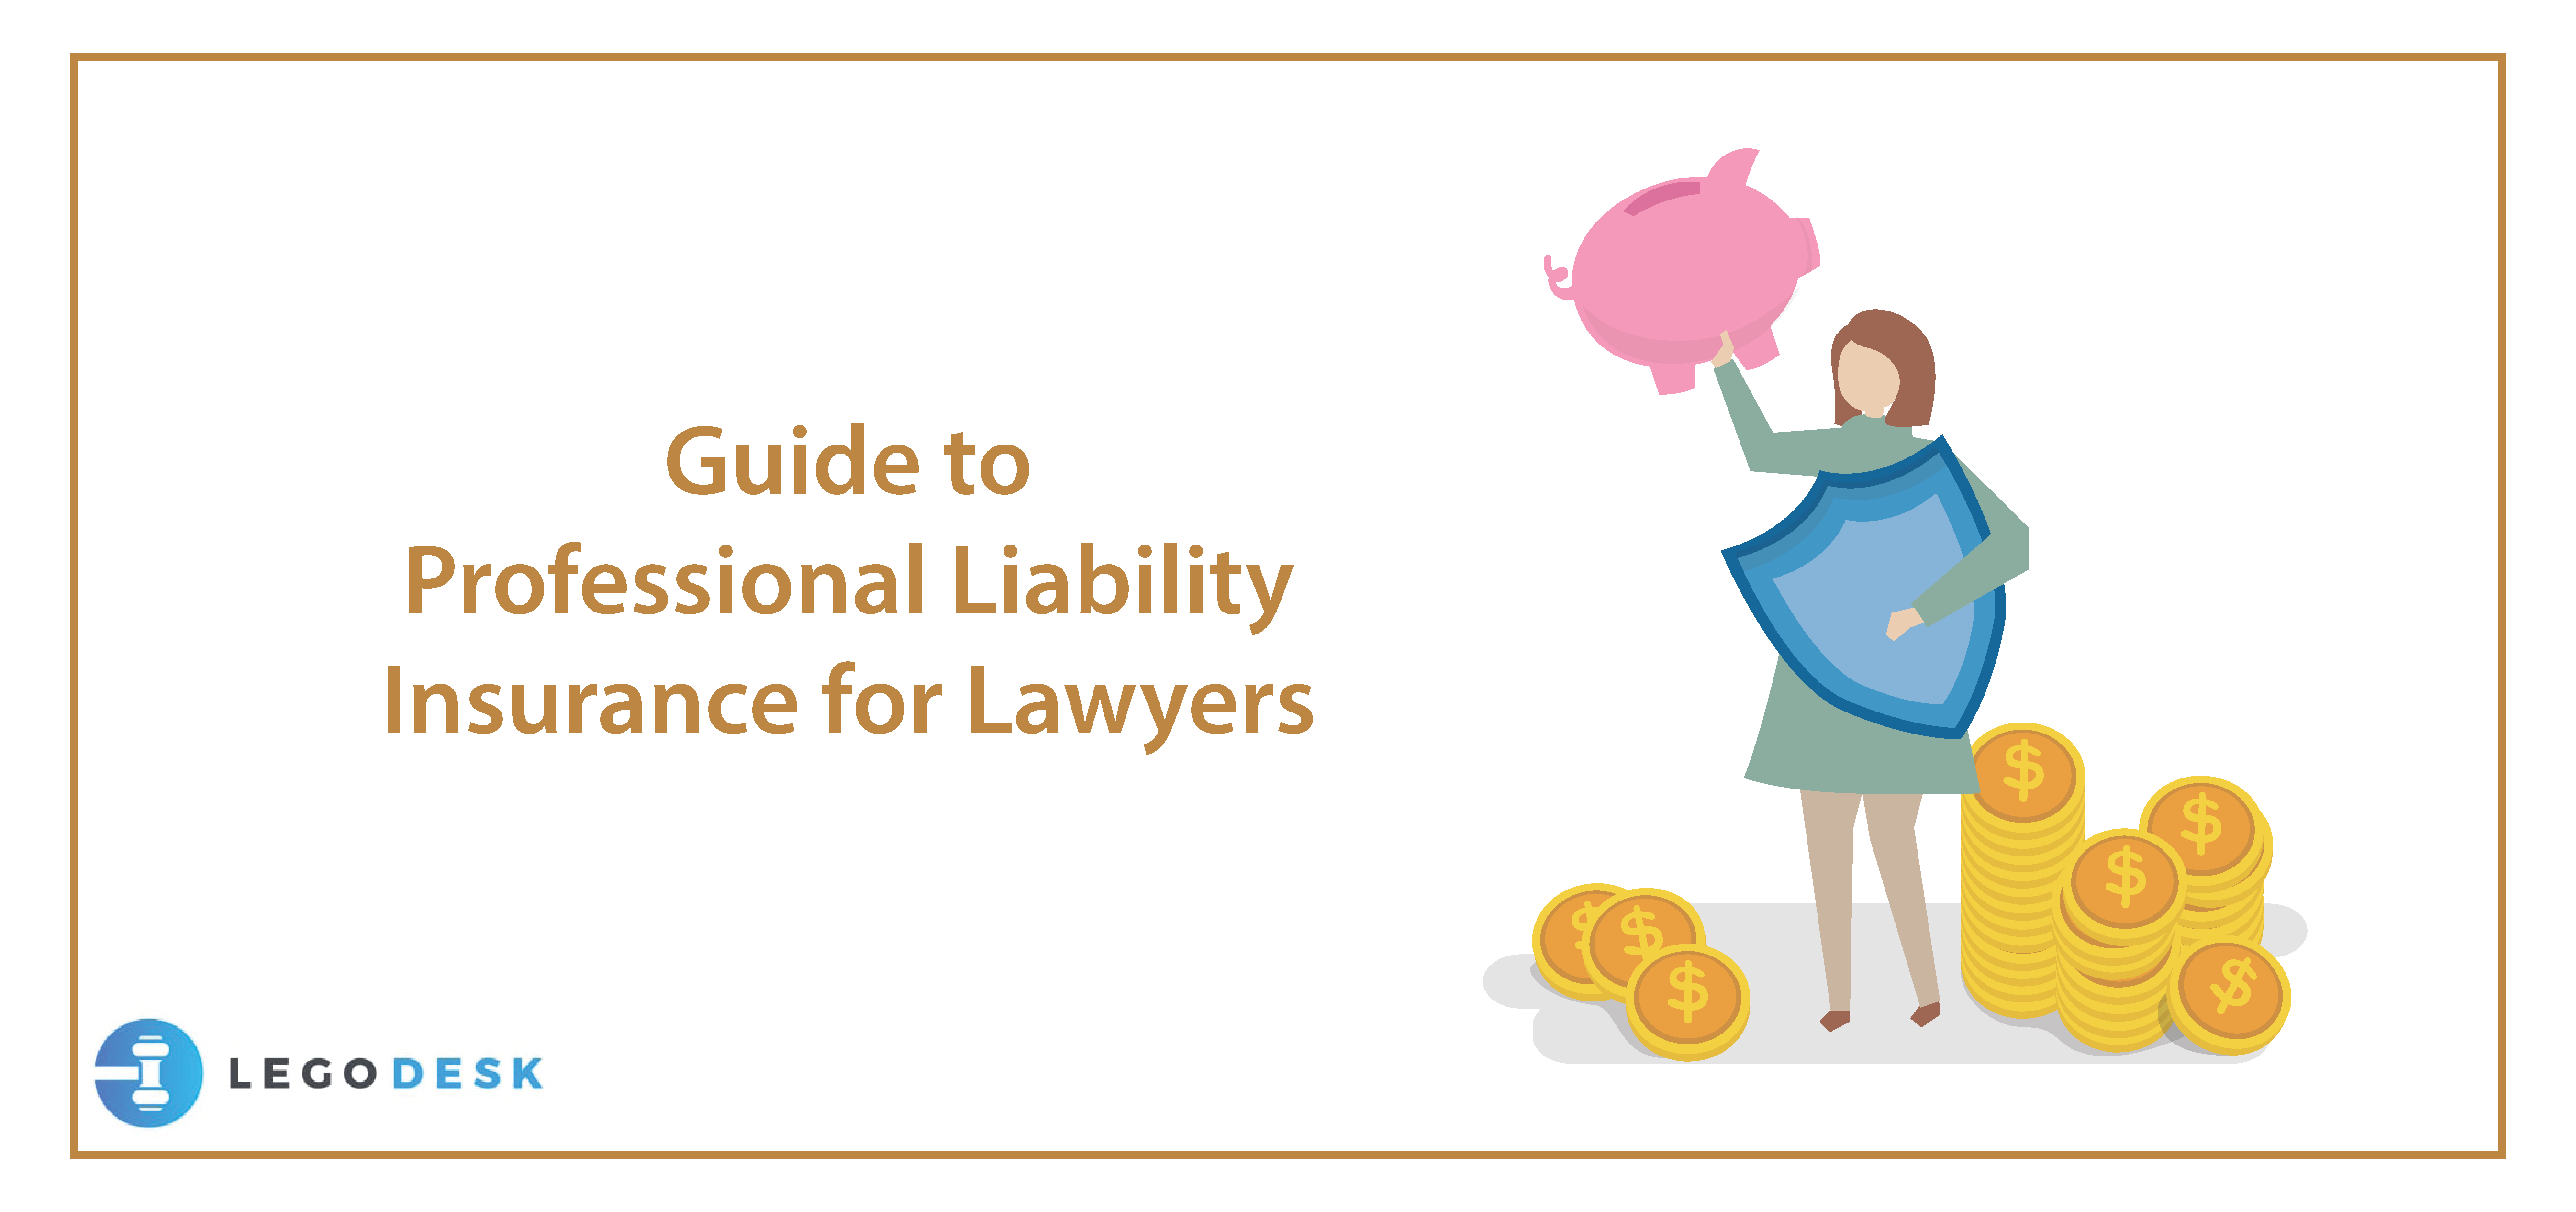 Professional Liability Insurance for Lawyers